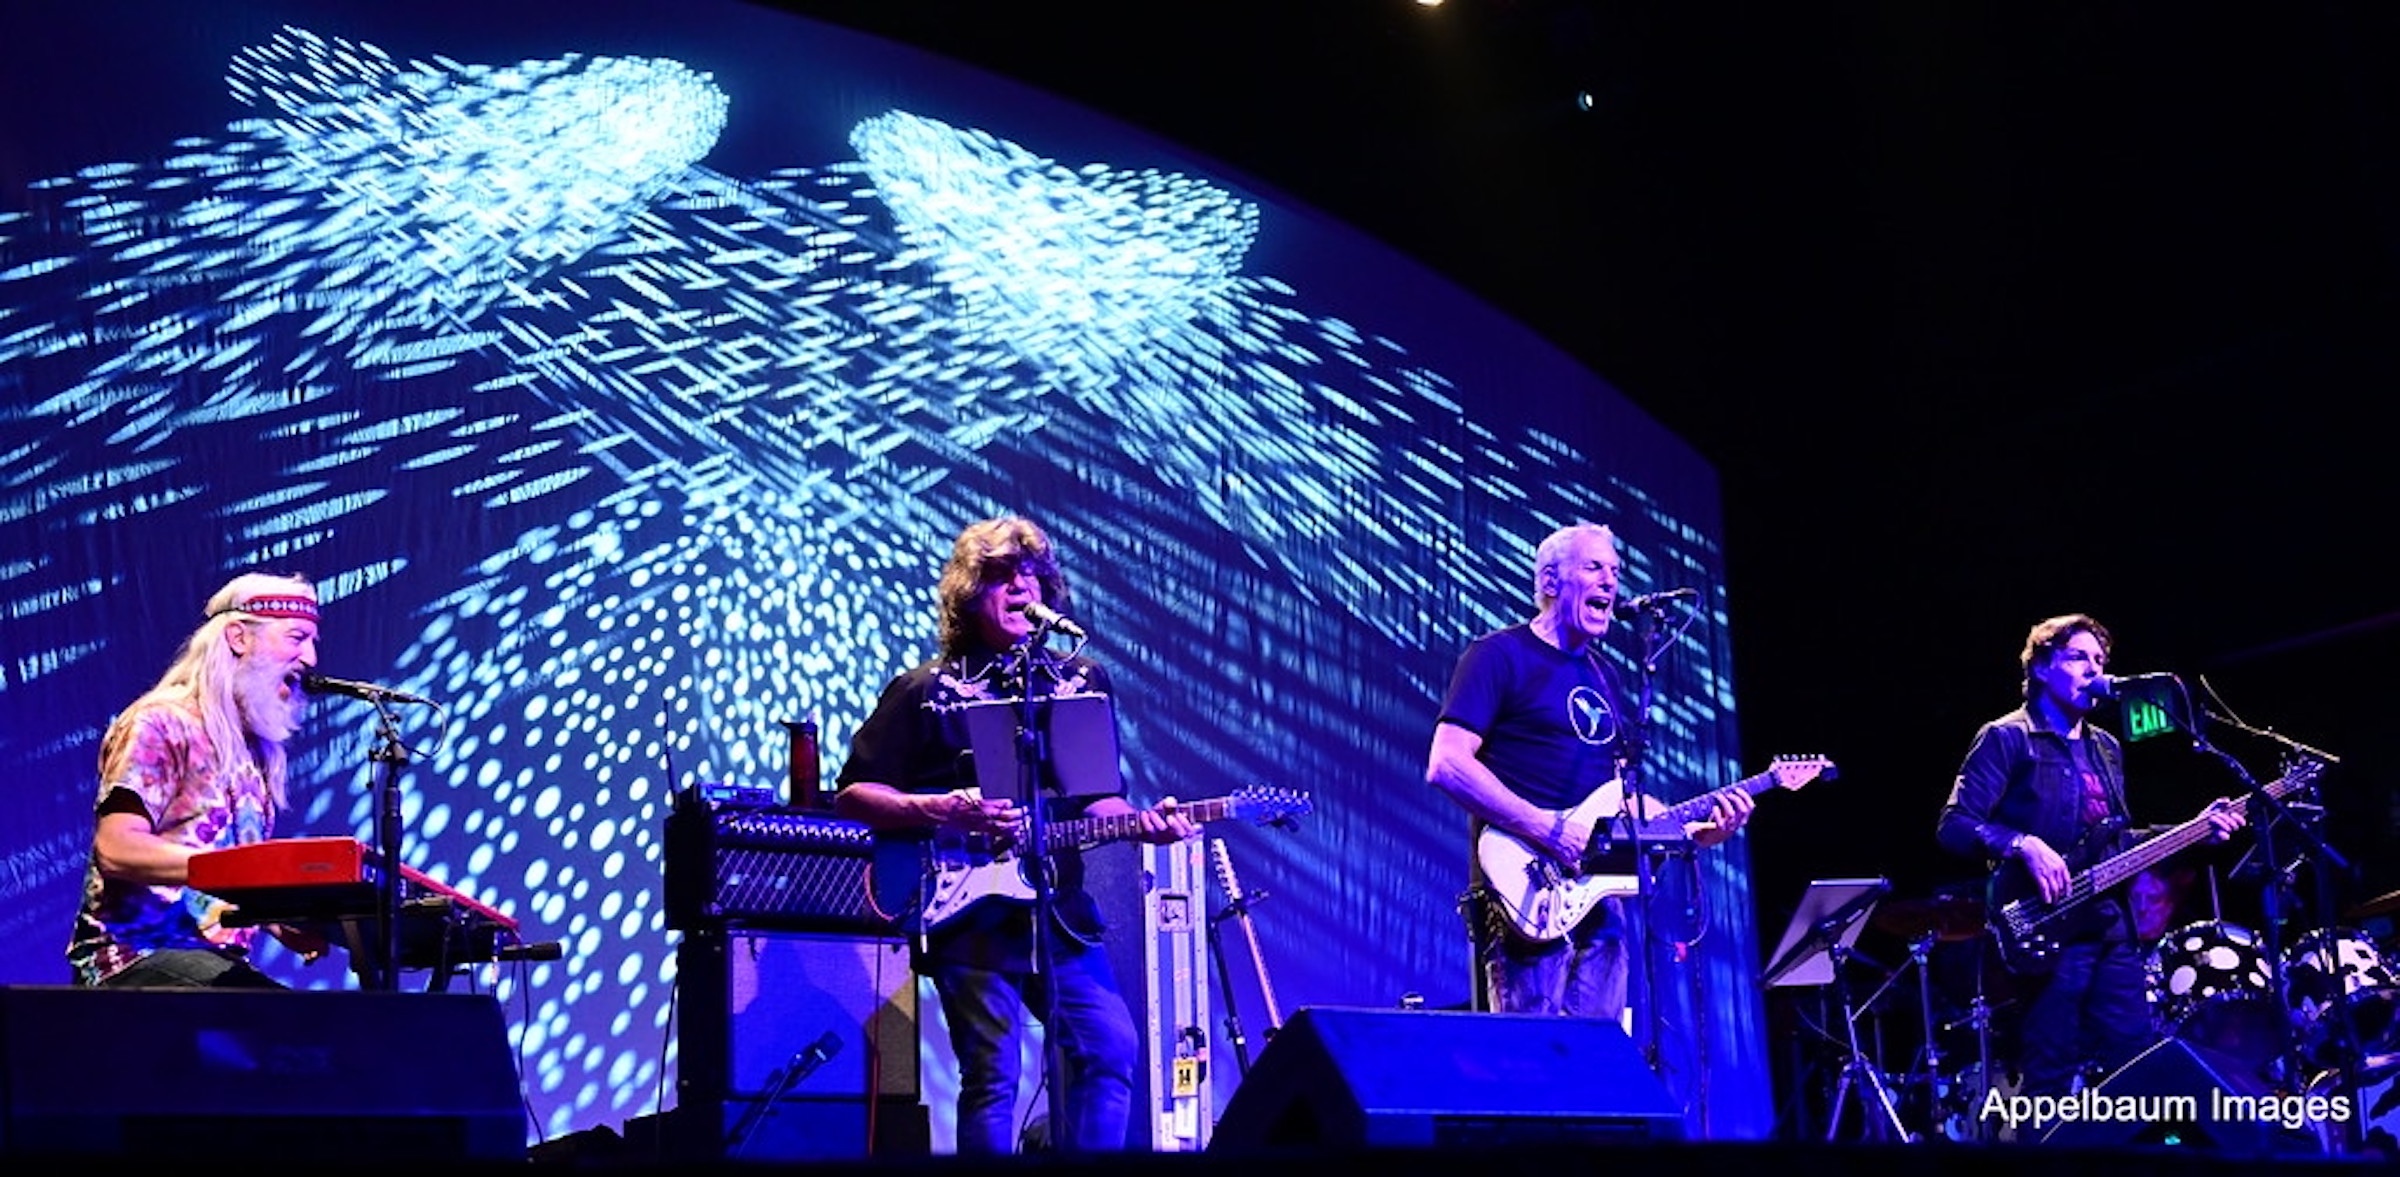 The Gilmour Project Shines a Light on ‘The Dark Side of the Moon'